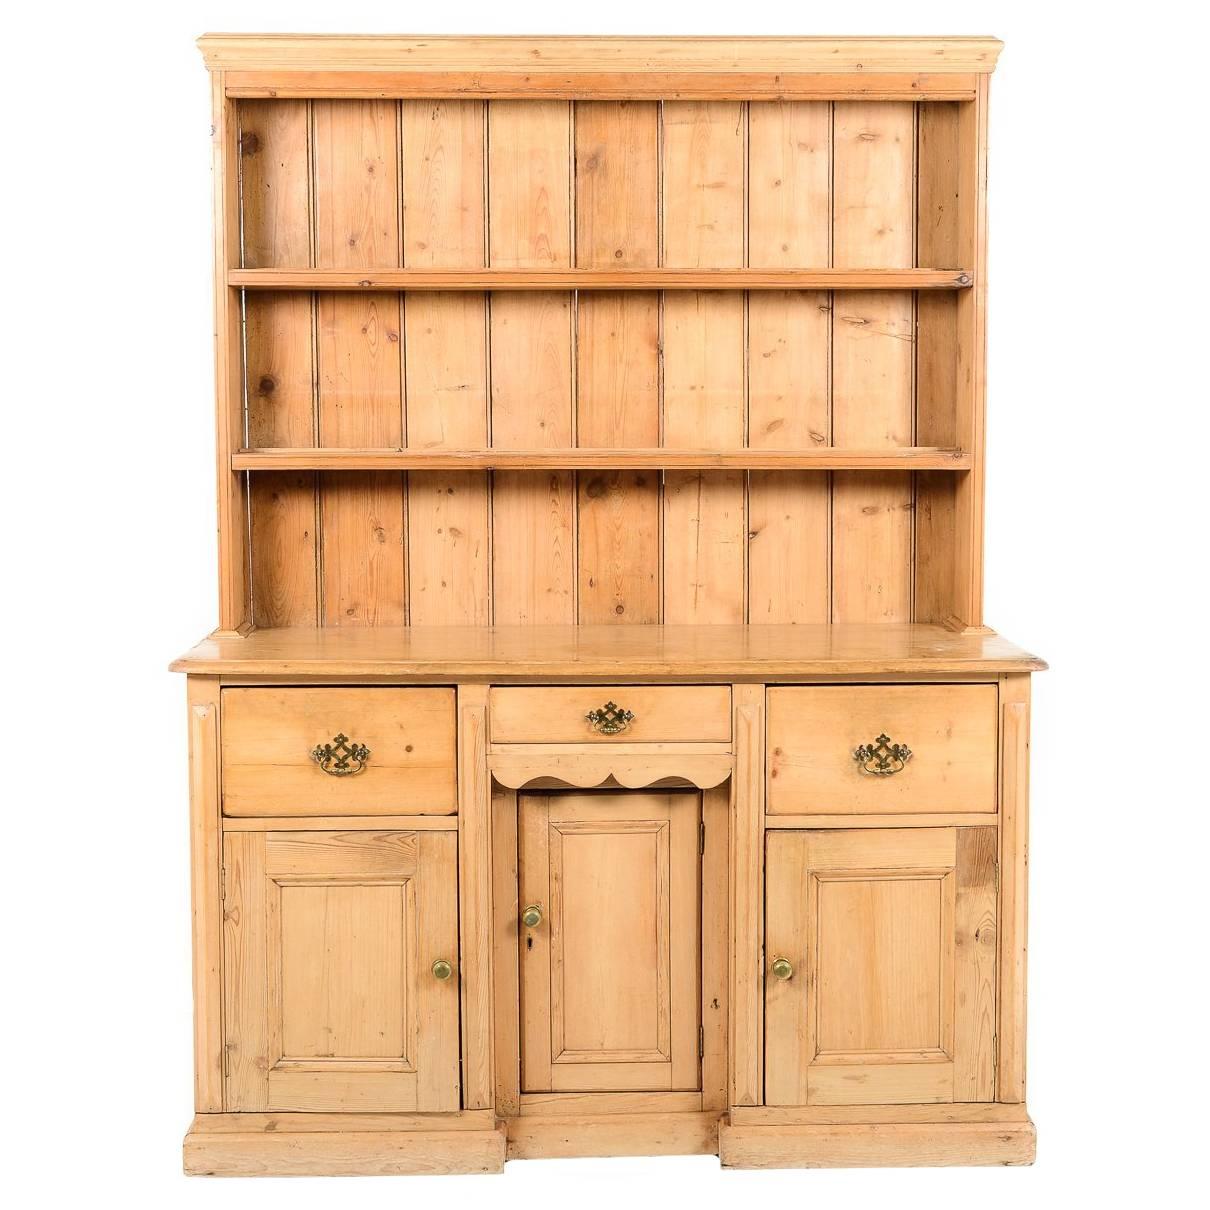 Antique 19th Century Solid Pine Country Style Welsh Dresser, Circa 1850